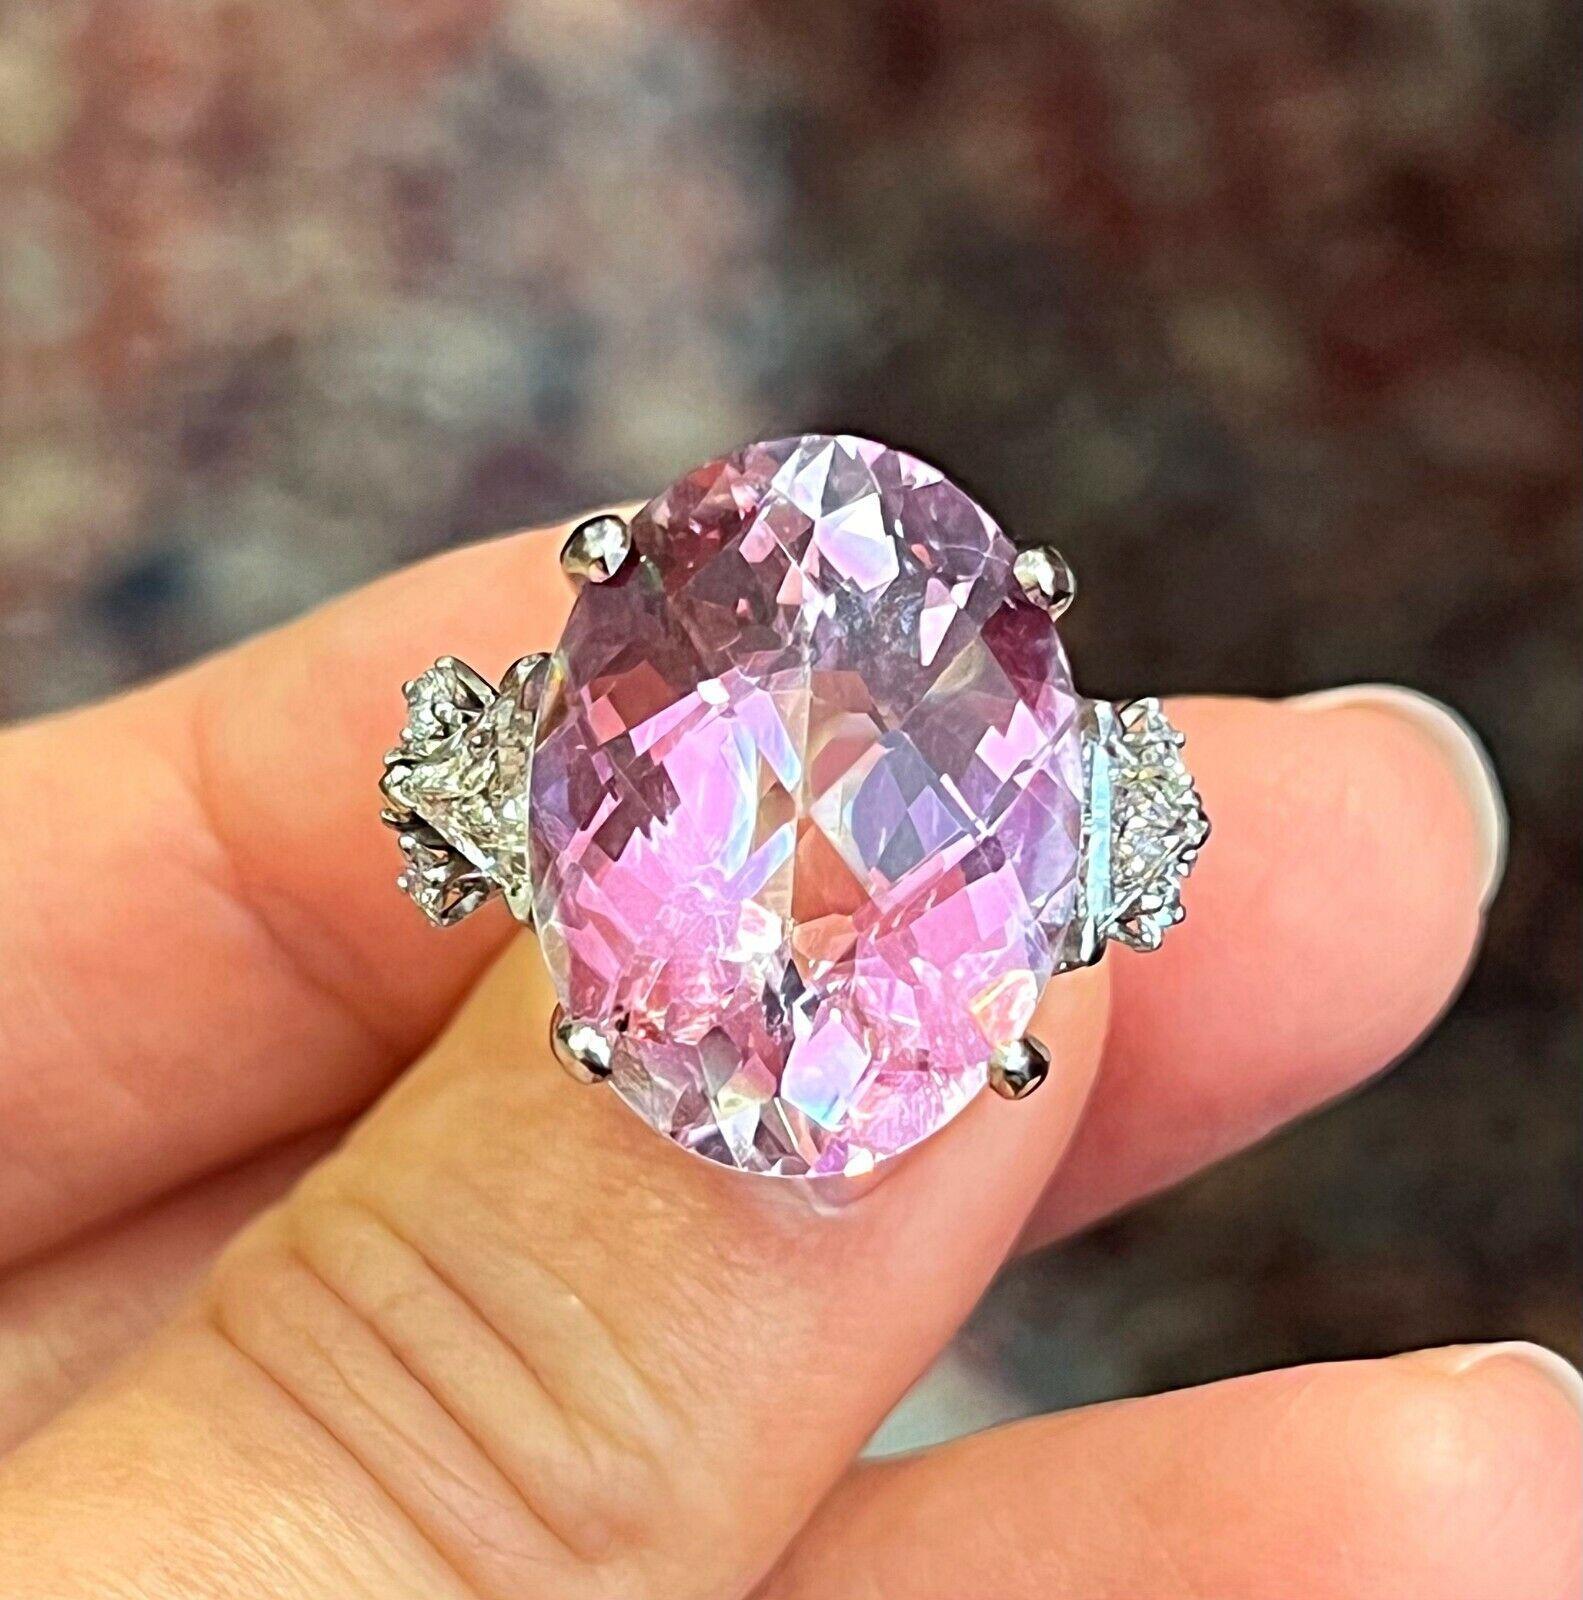 Large Oval Kunzite and Diamond Ring in Platinum

Large Oval Kunzite and Diamond Ring features a 22.50 carat Oval-shaped Kunzite in the center accented by 2 Trillion-cut Diamond and 6 Round Brilliant-cut Diamond set in Platinum.

Total kunzite weight